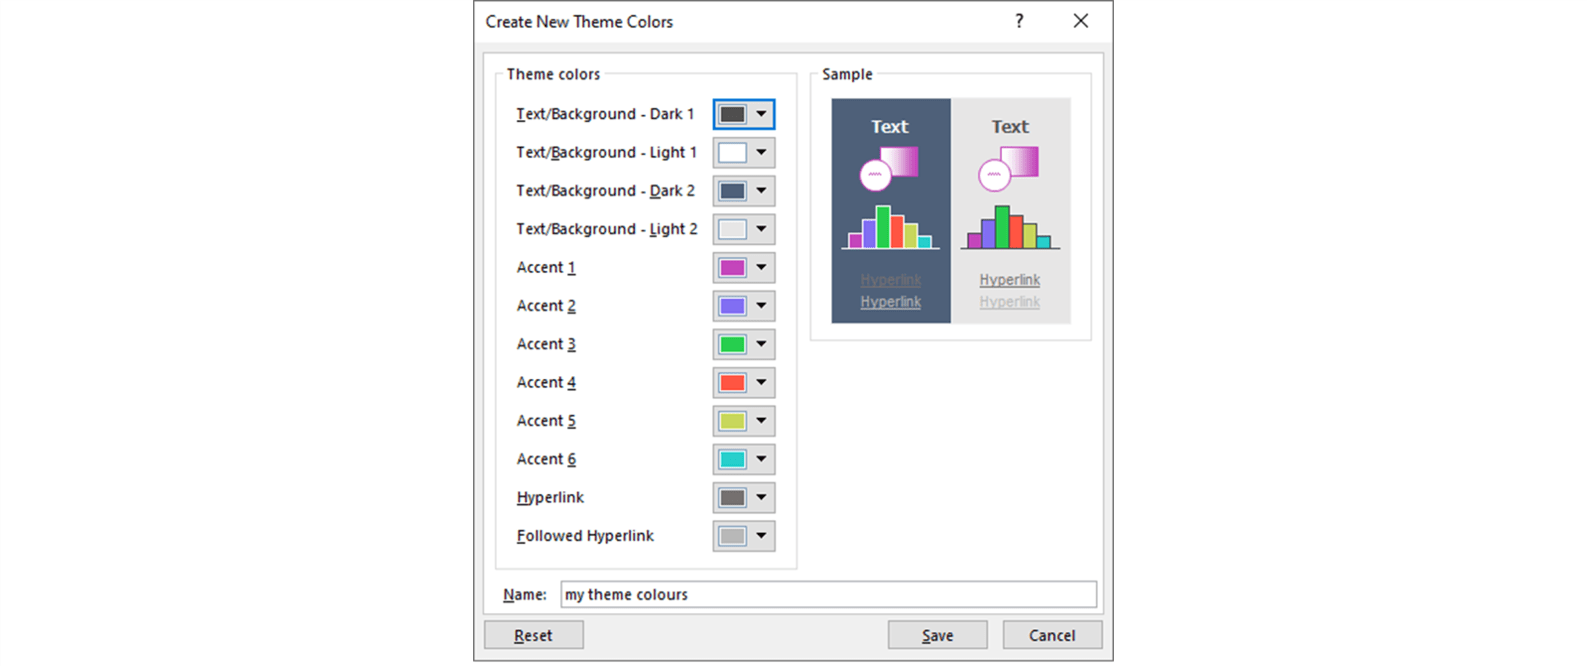 Screenshot of the Create New Theme Colors pop up window in PowerPoint